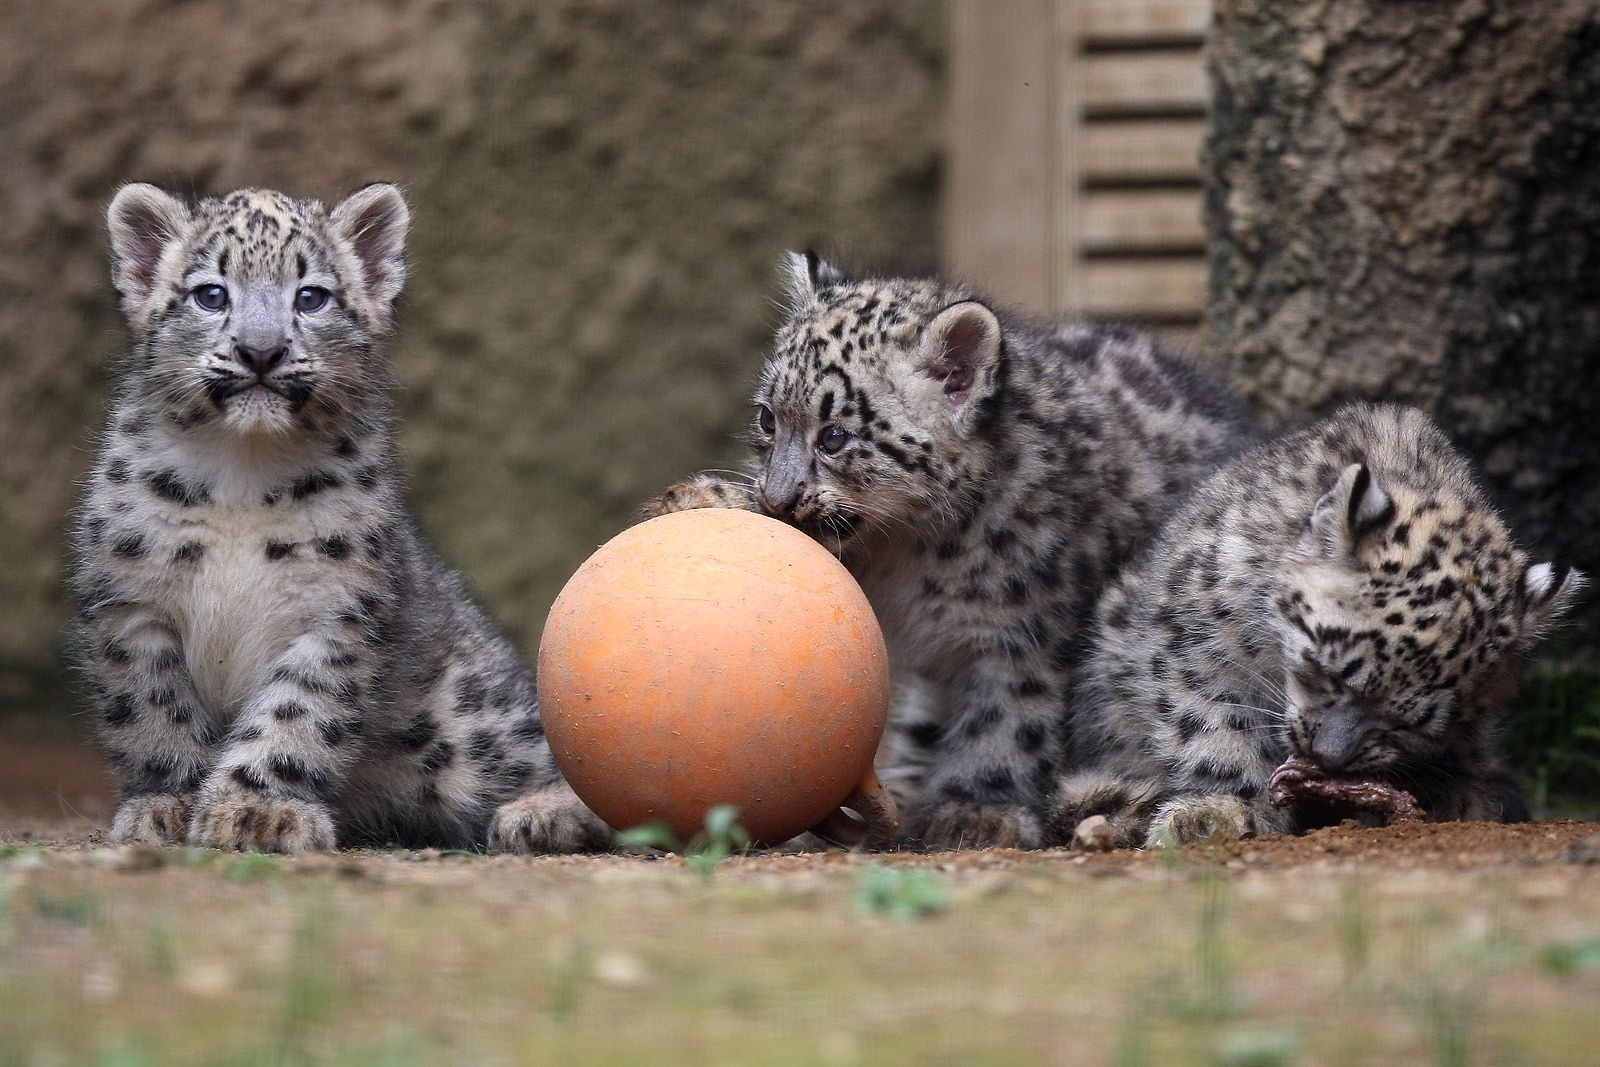 cubs, animals, young, ball, play, snow leopards